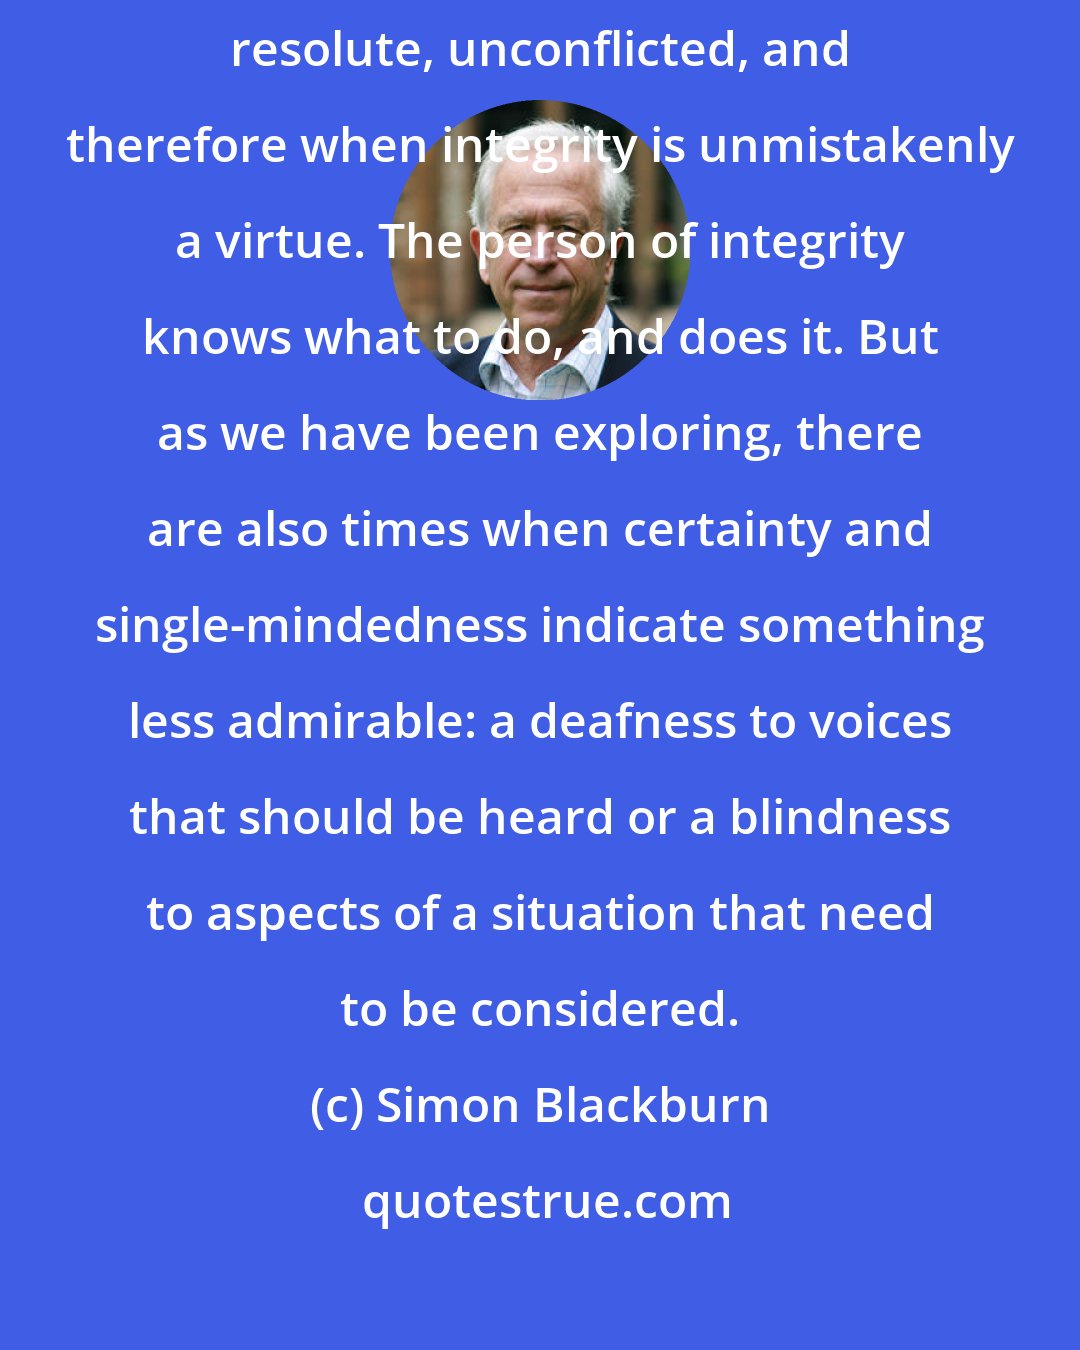 Simon Blackburn: There are normal times when it is wholly admirable to be steadfast, resolute, unconflicted, and therefore when integrity is unmistakenly a virtue. The person of integrity knows what to do, and does it. But as we have been exploring, there are also times when certainty and single-mindedness indicate something less admirable: a deafness to voices that should be heard or a blindness to aspects of a situation that need to be considered.